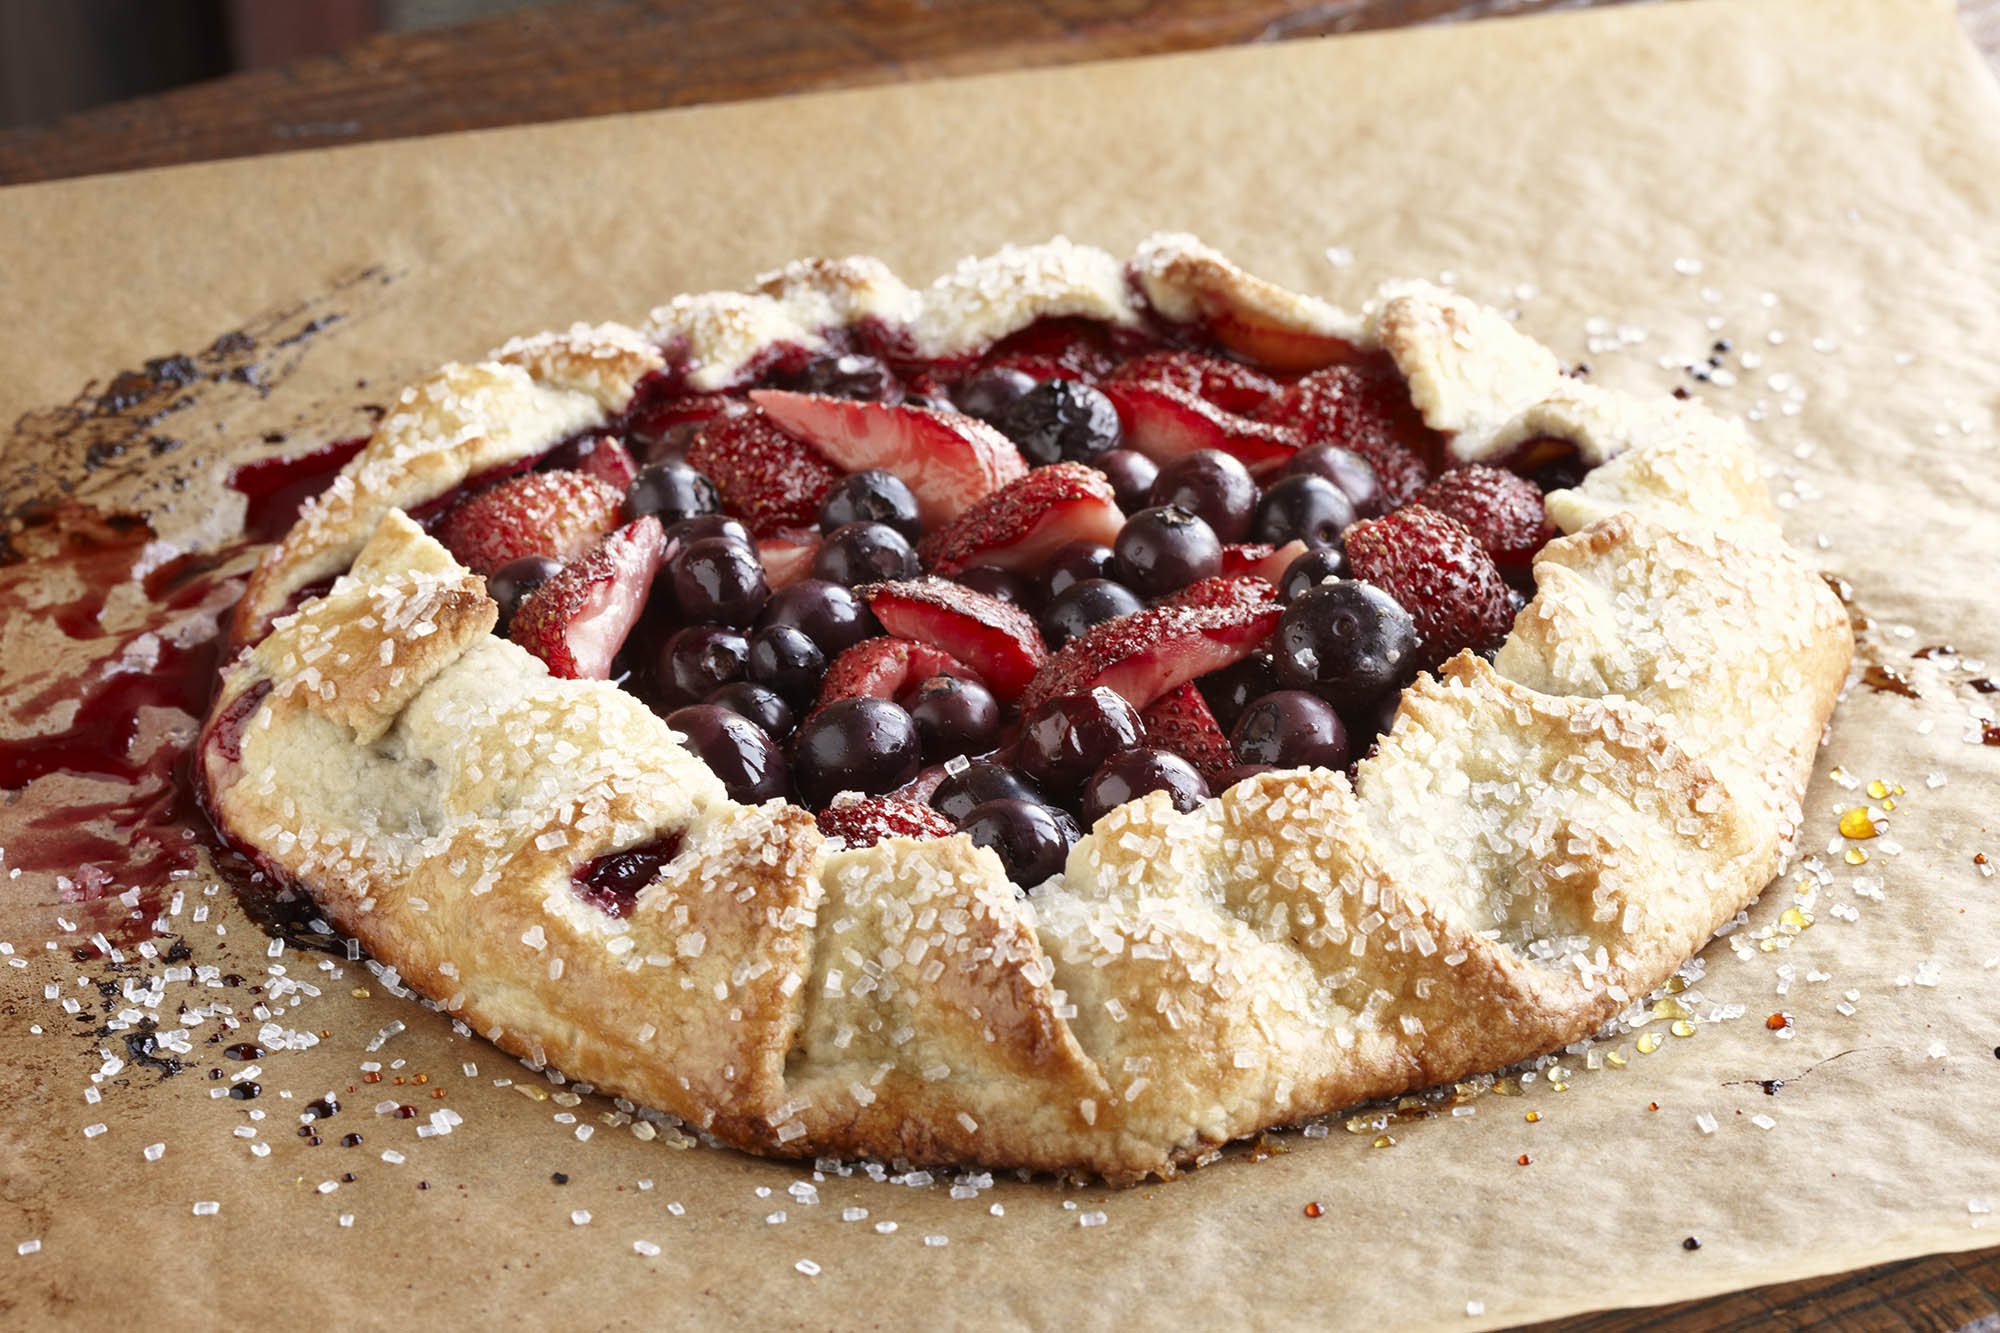 Tuscan Crostata with Mixed Berries